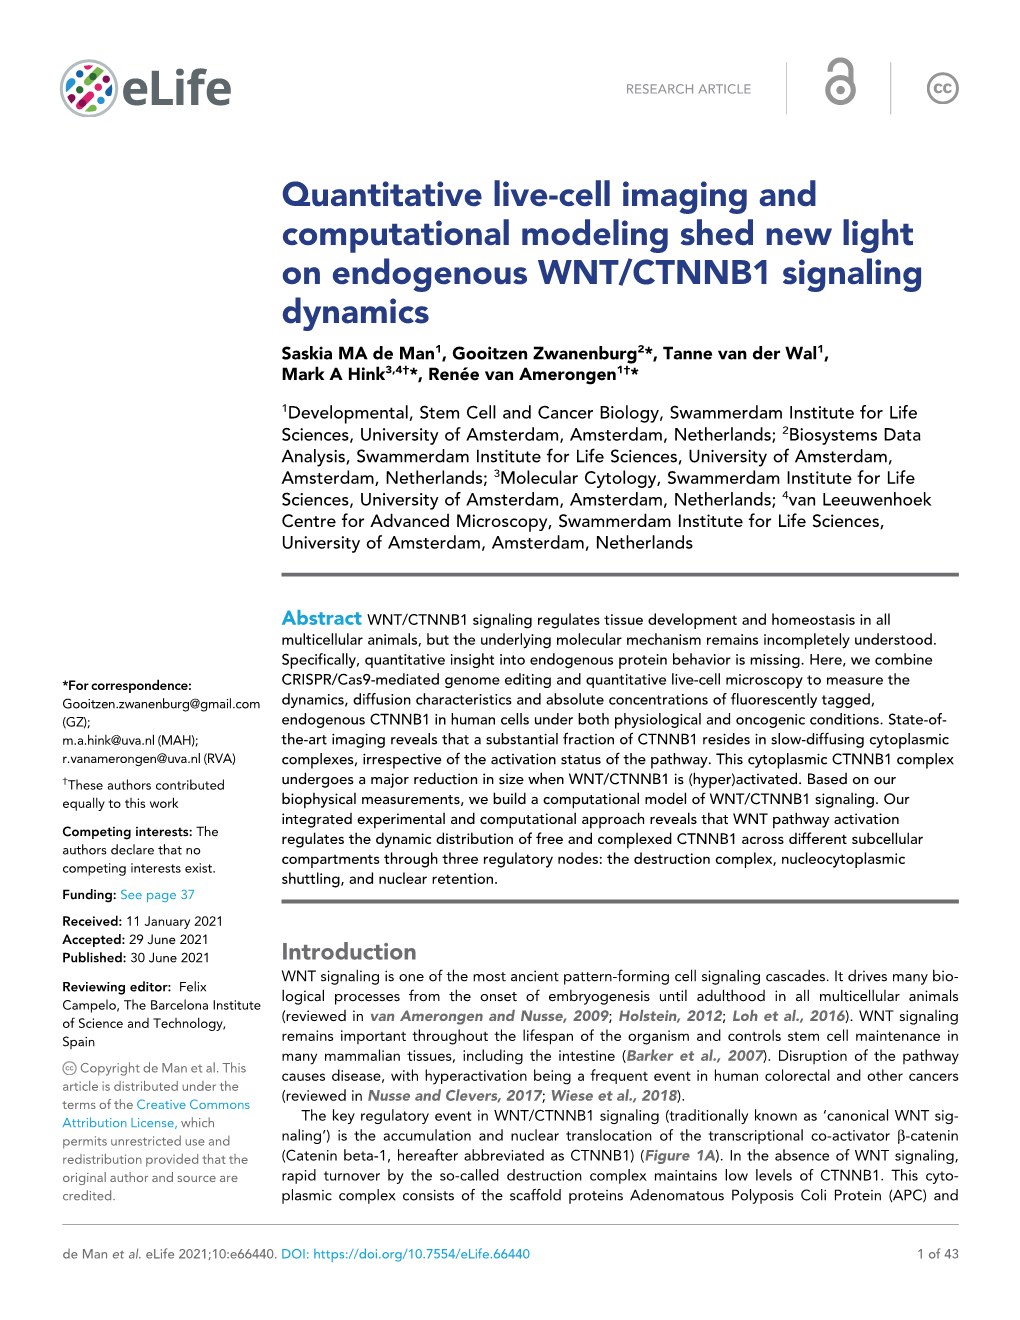 Quantitative Live-Cell Imaging and Computational Modeling Shed New